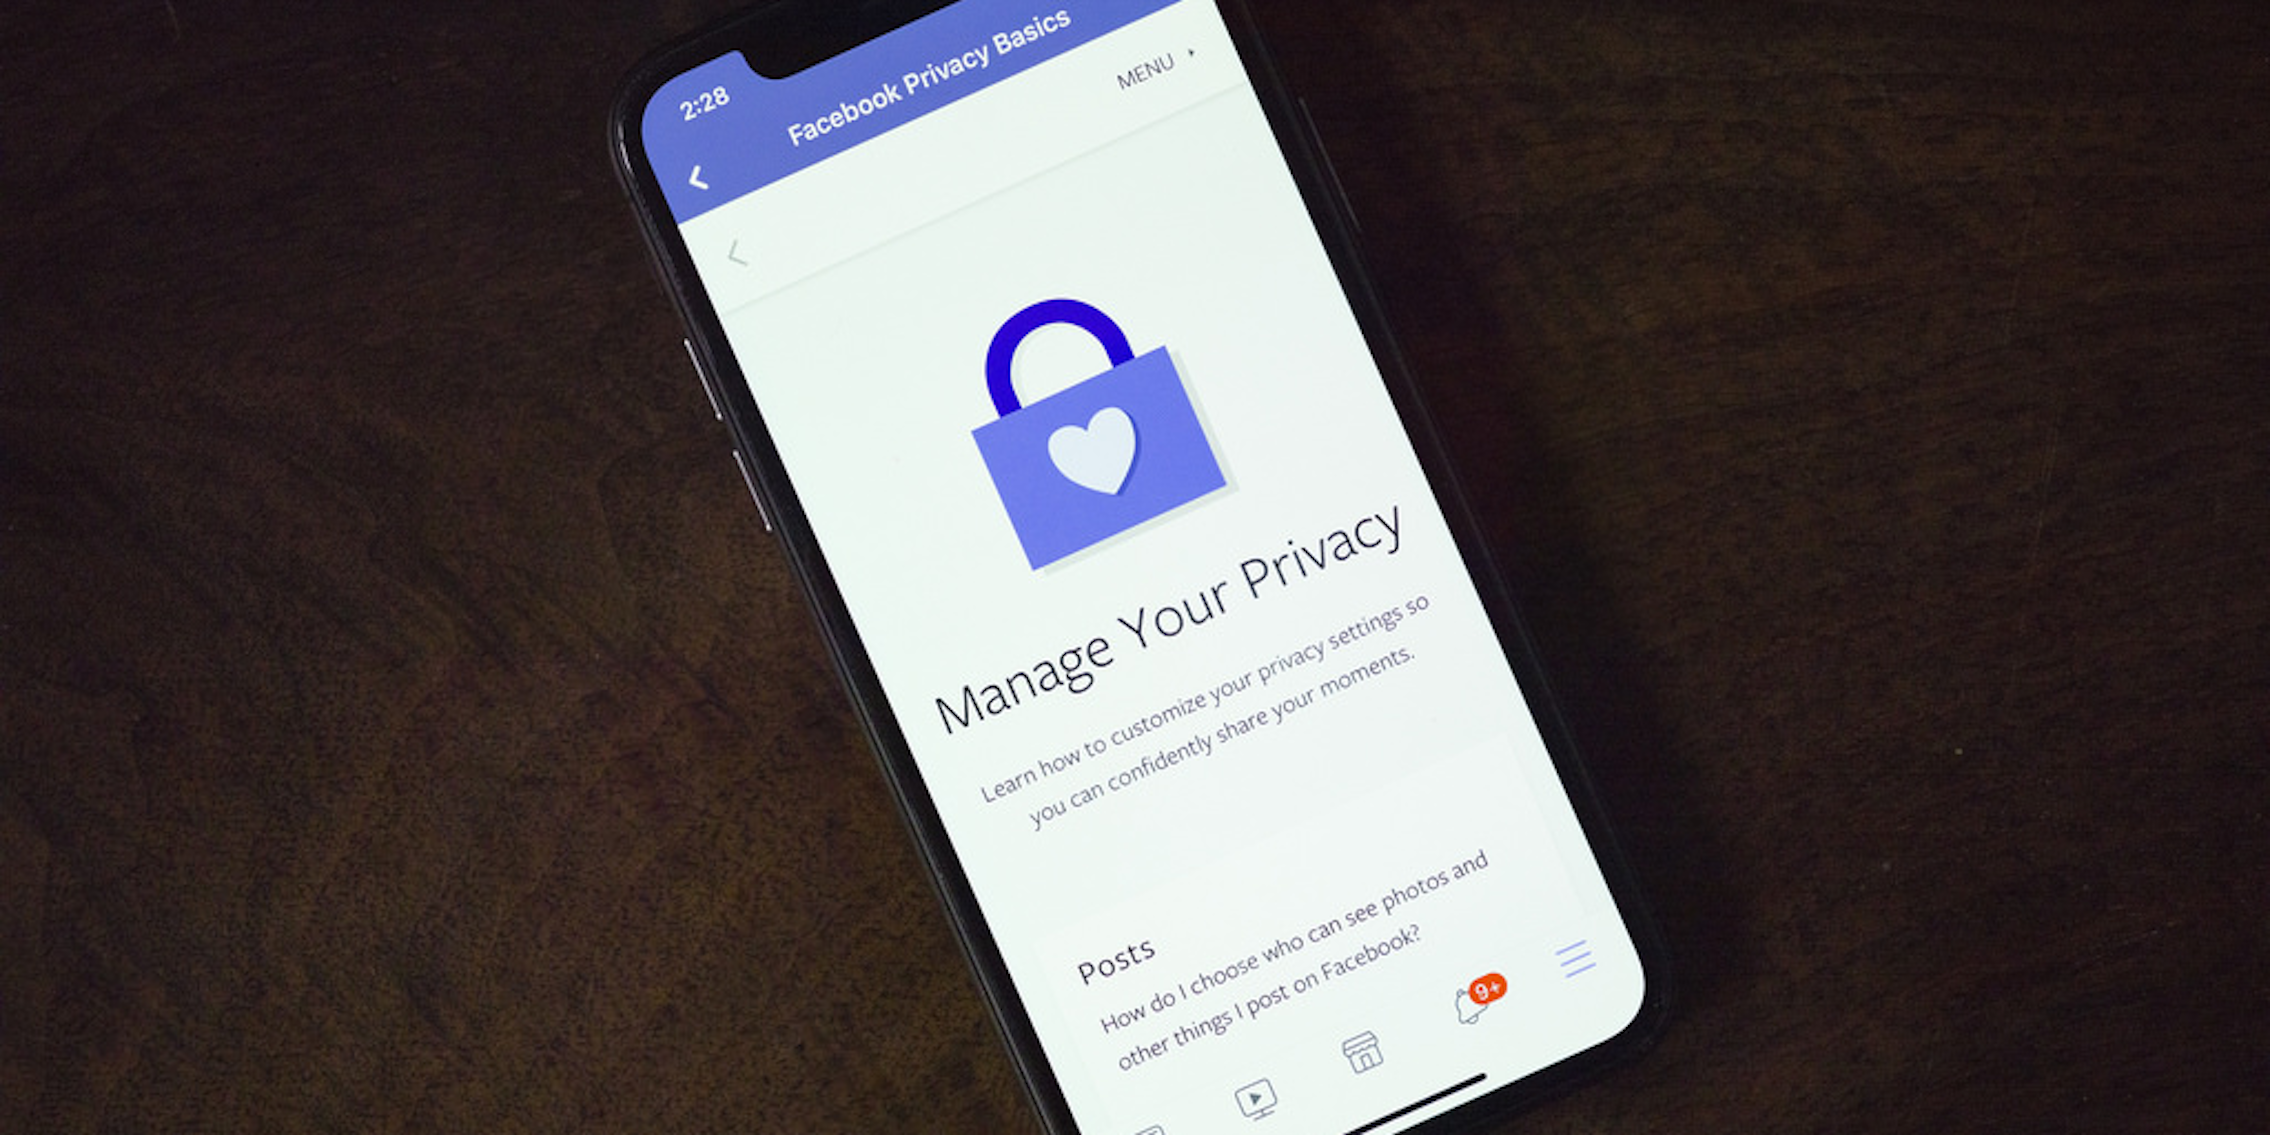 Facebook privacy page on iPhone X